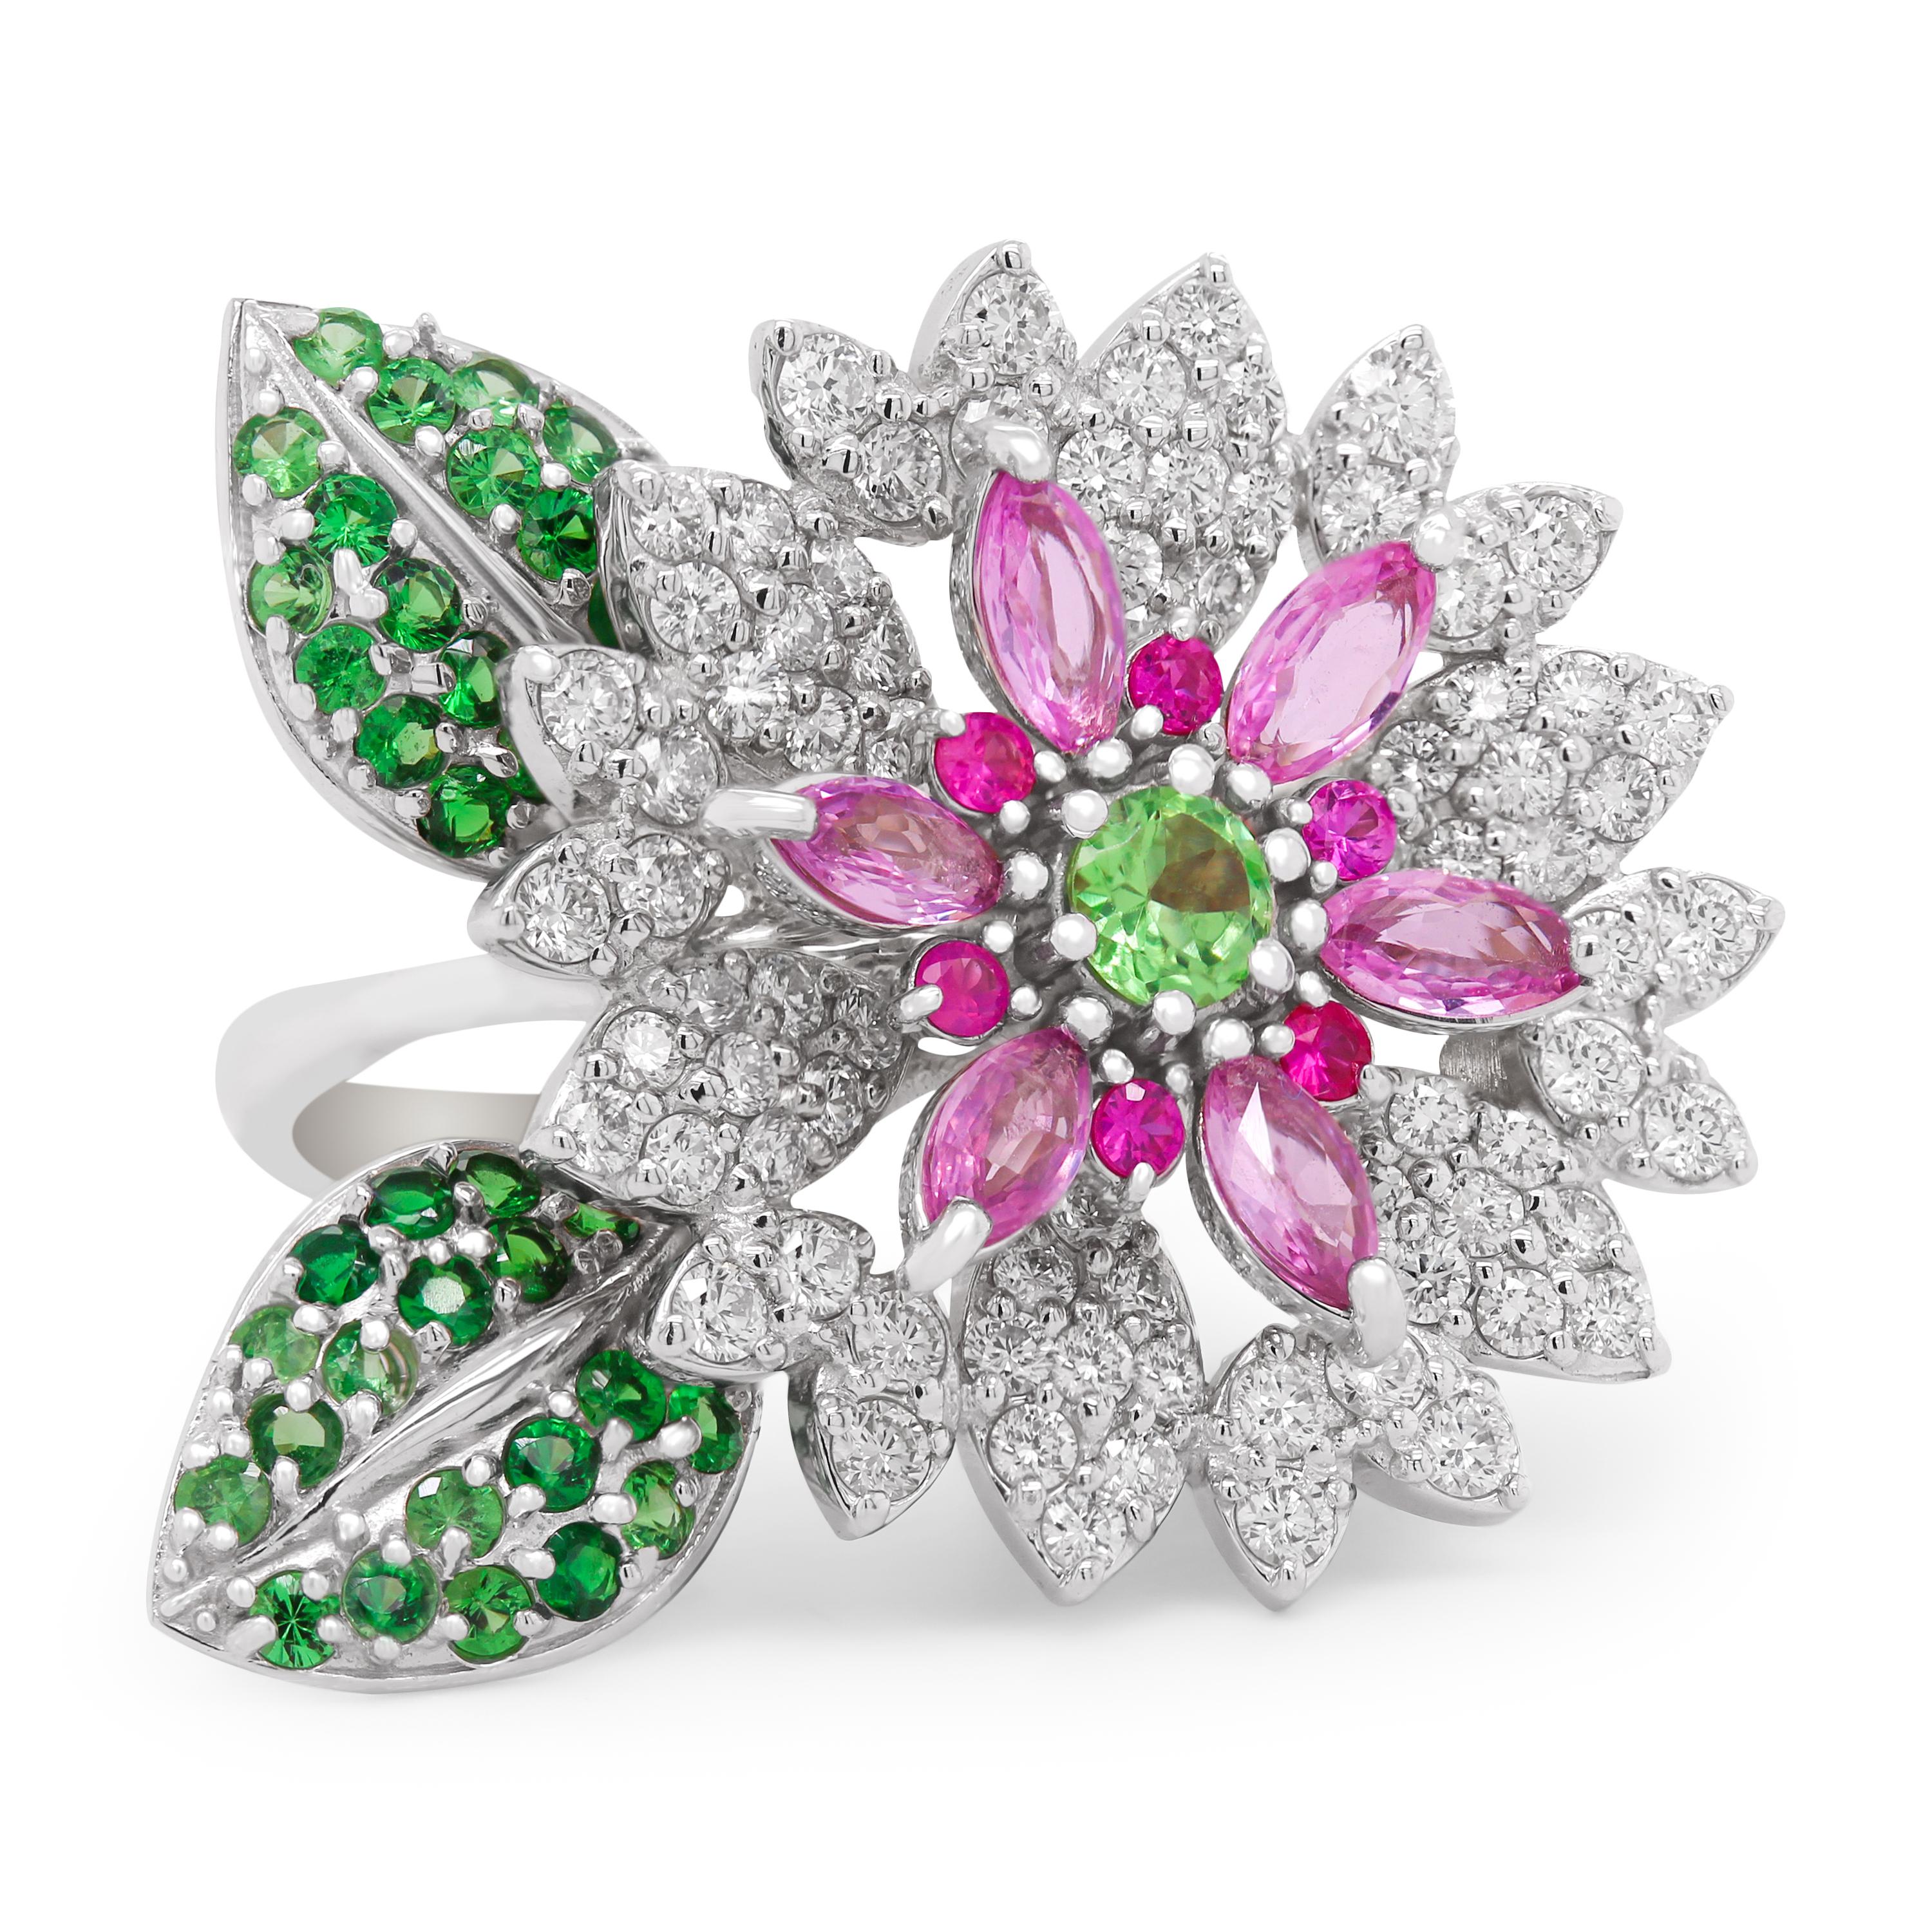 Stambolian 18k White Gold Marquise Pink Sapphires Diamonds Tsavorite Floral Ring

This stunning ring features a row of marquise-cut pink sapphires and a tsavorite center along with damond set petals and two leaves set with Tsavorites, shaded dark to